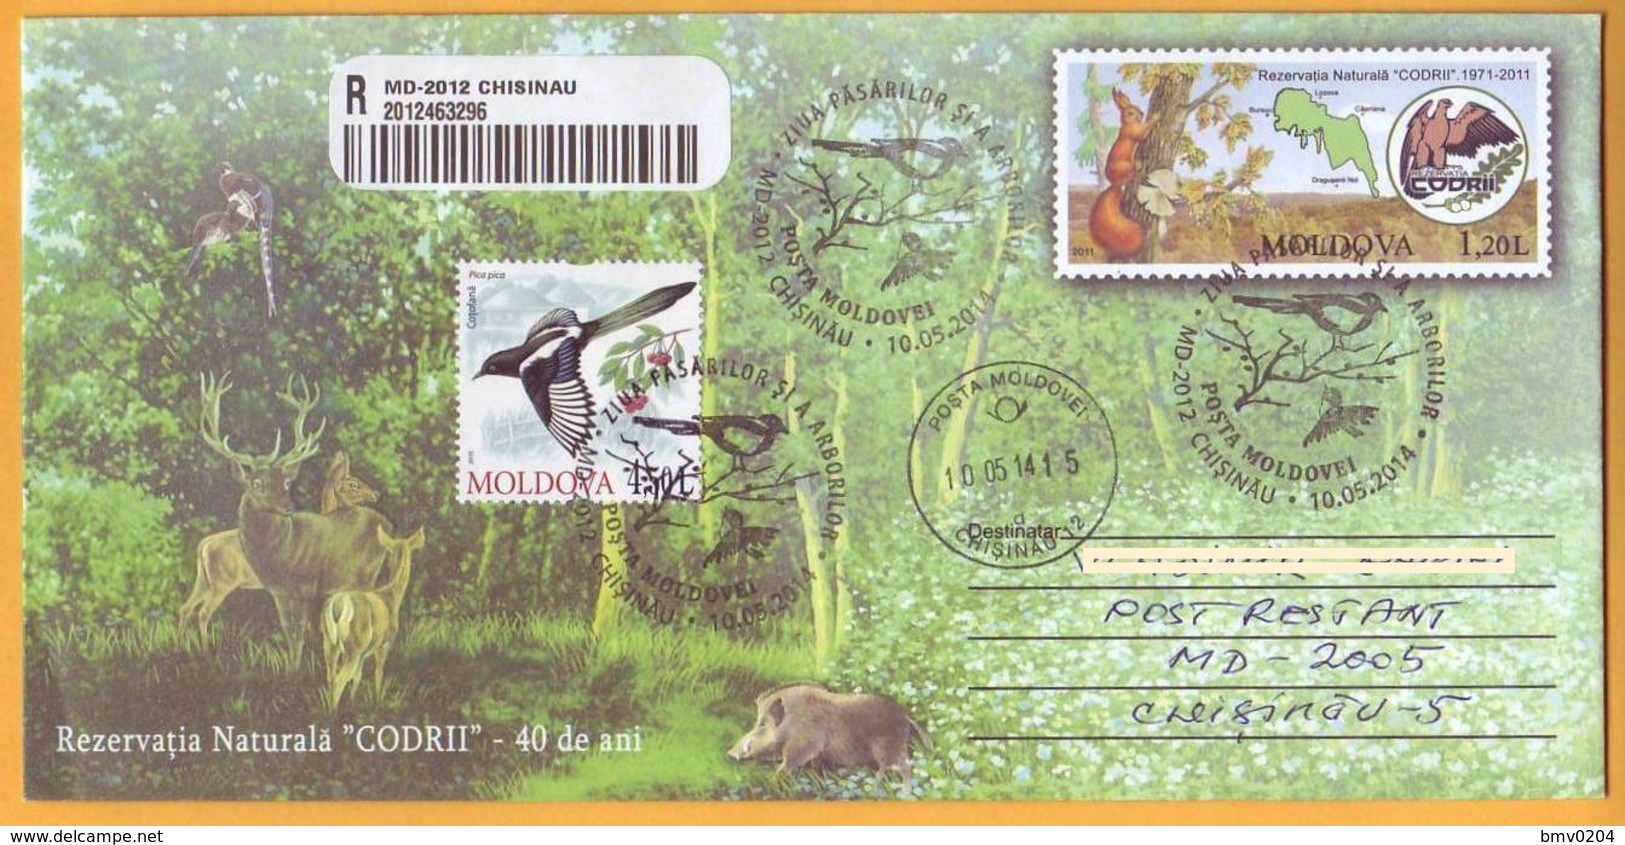 2014 Moldova Moldavie National Day Of Birds And Trees. Reserve "CODRII" Magpie. Boar. Squirrel. Forest. Doe - Coucous, Touracos